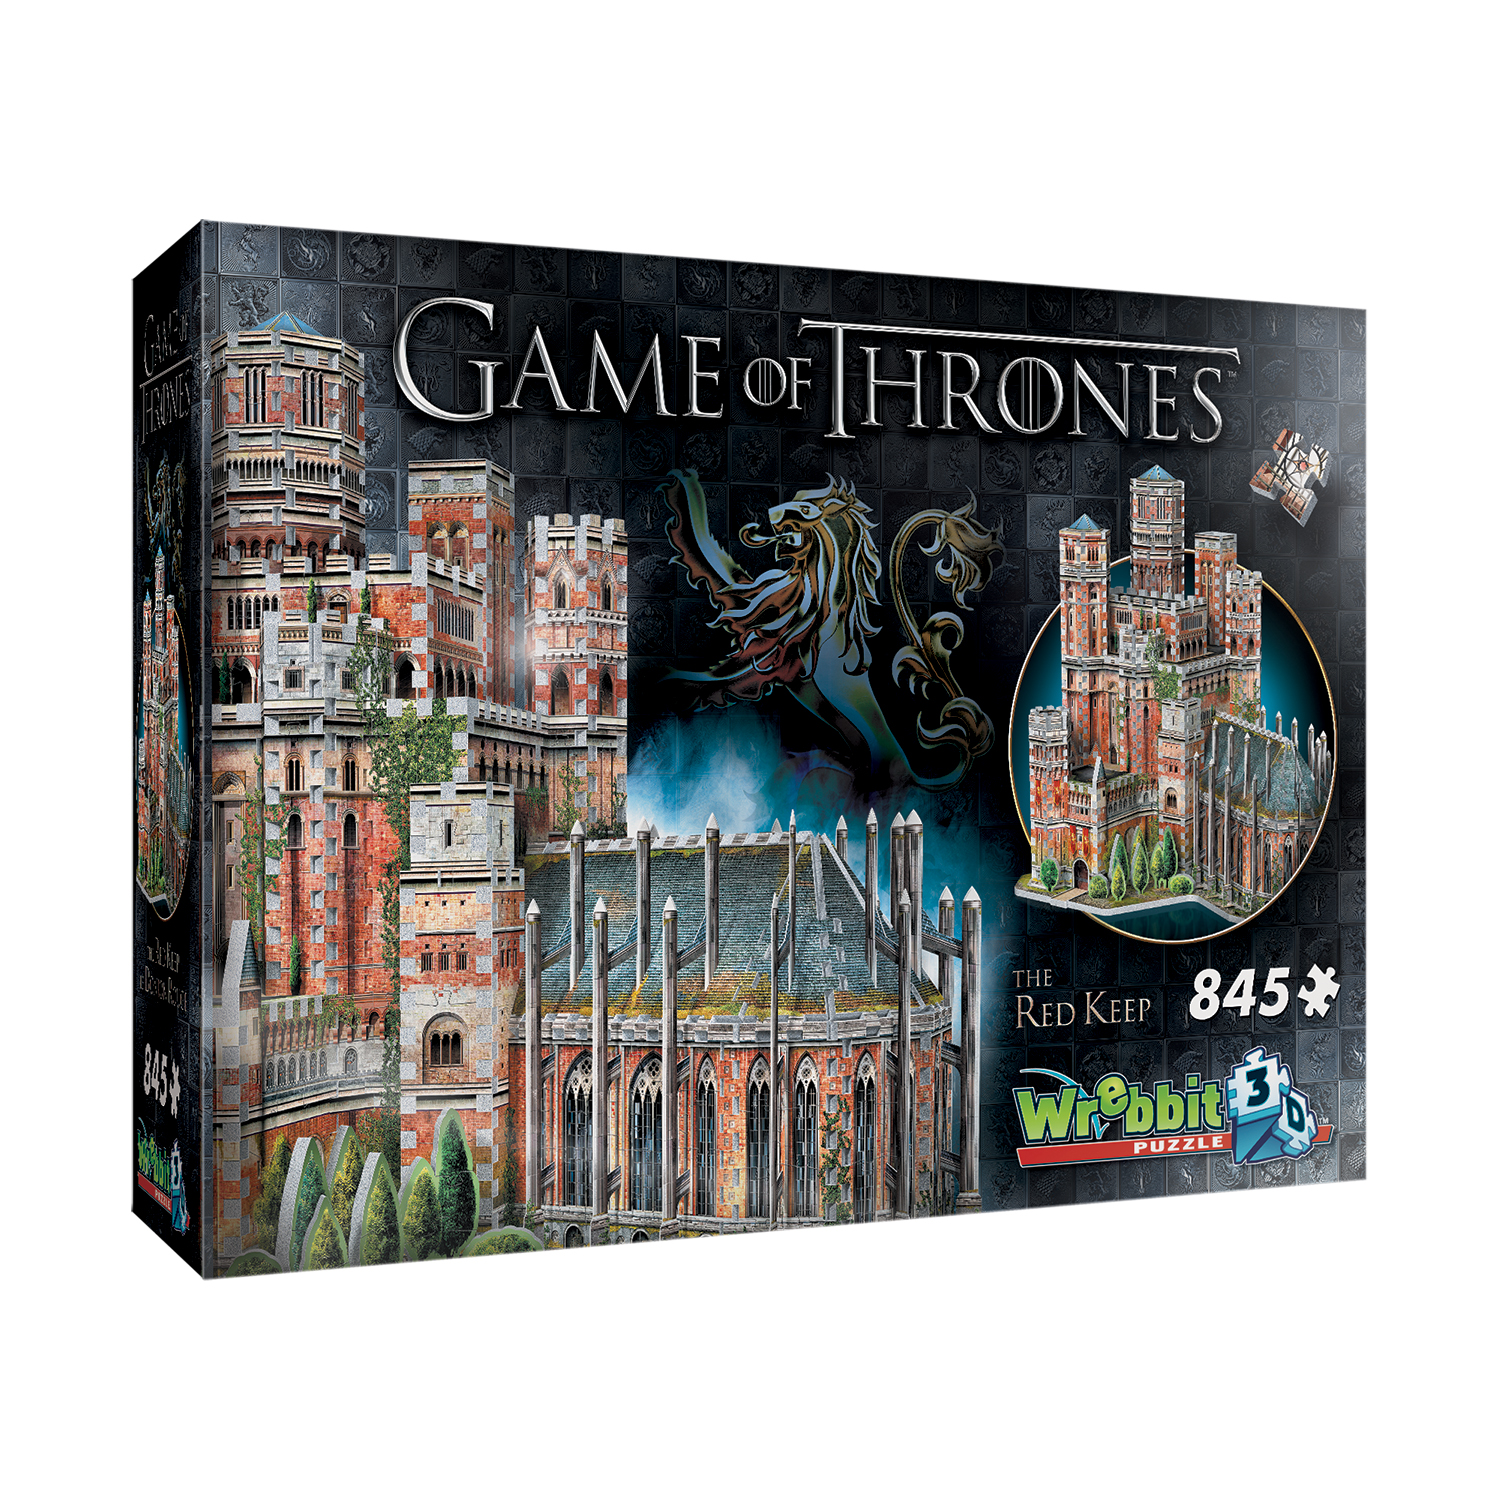 Wrebbit Puzzles Game of Thrones - The Red Keep 3D Puzzle: 845 Pcs